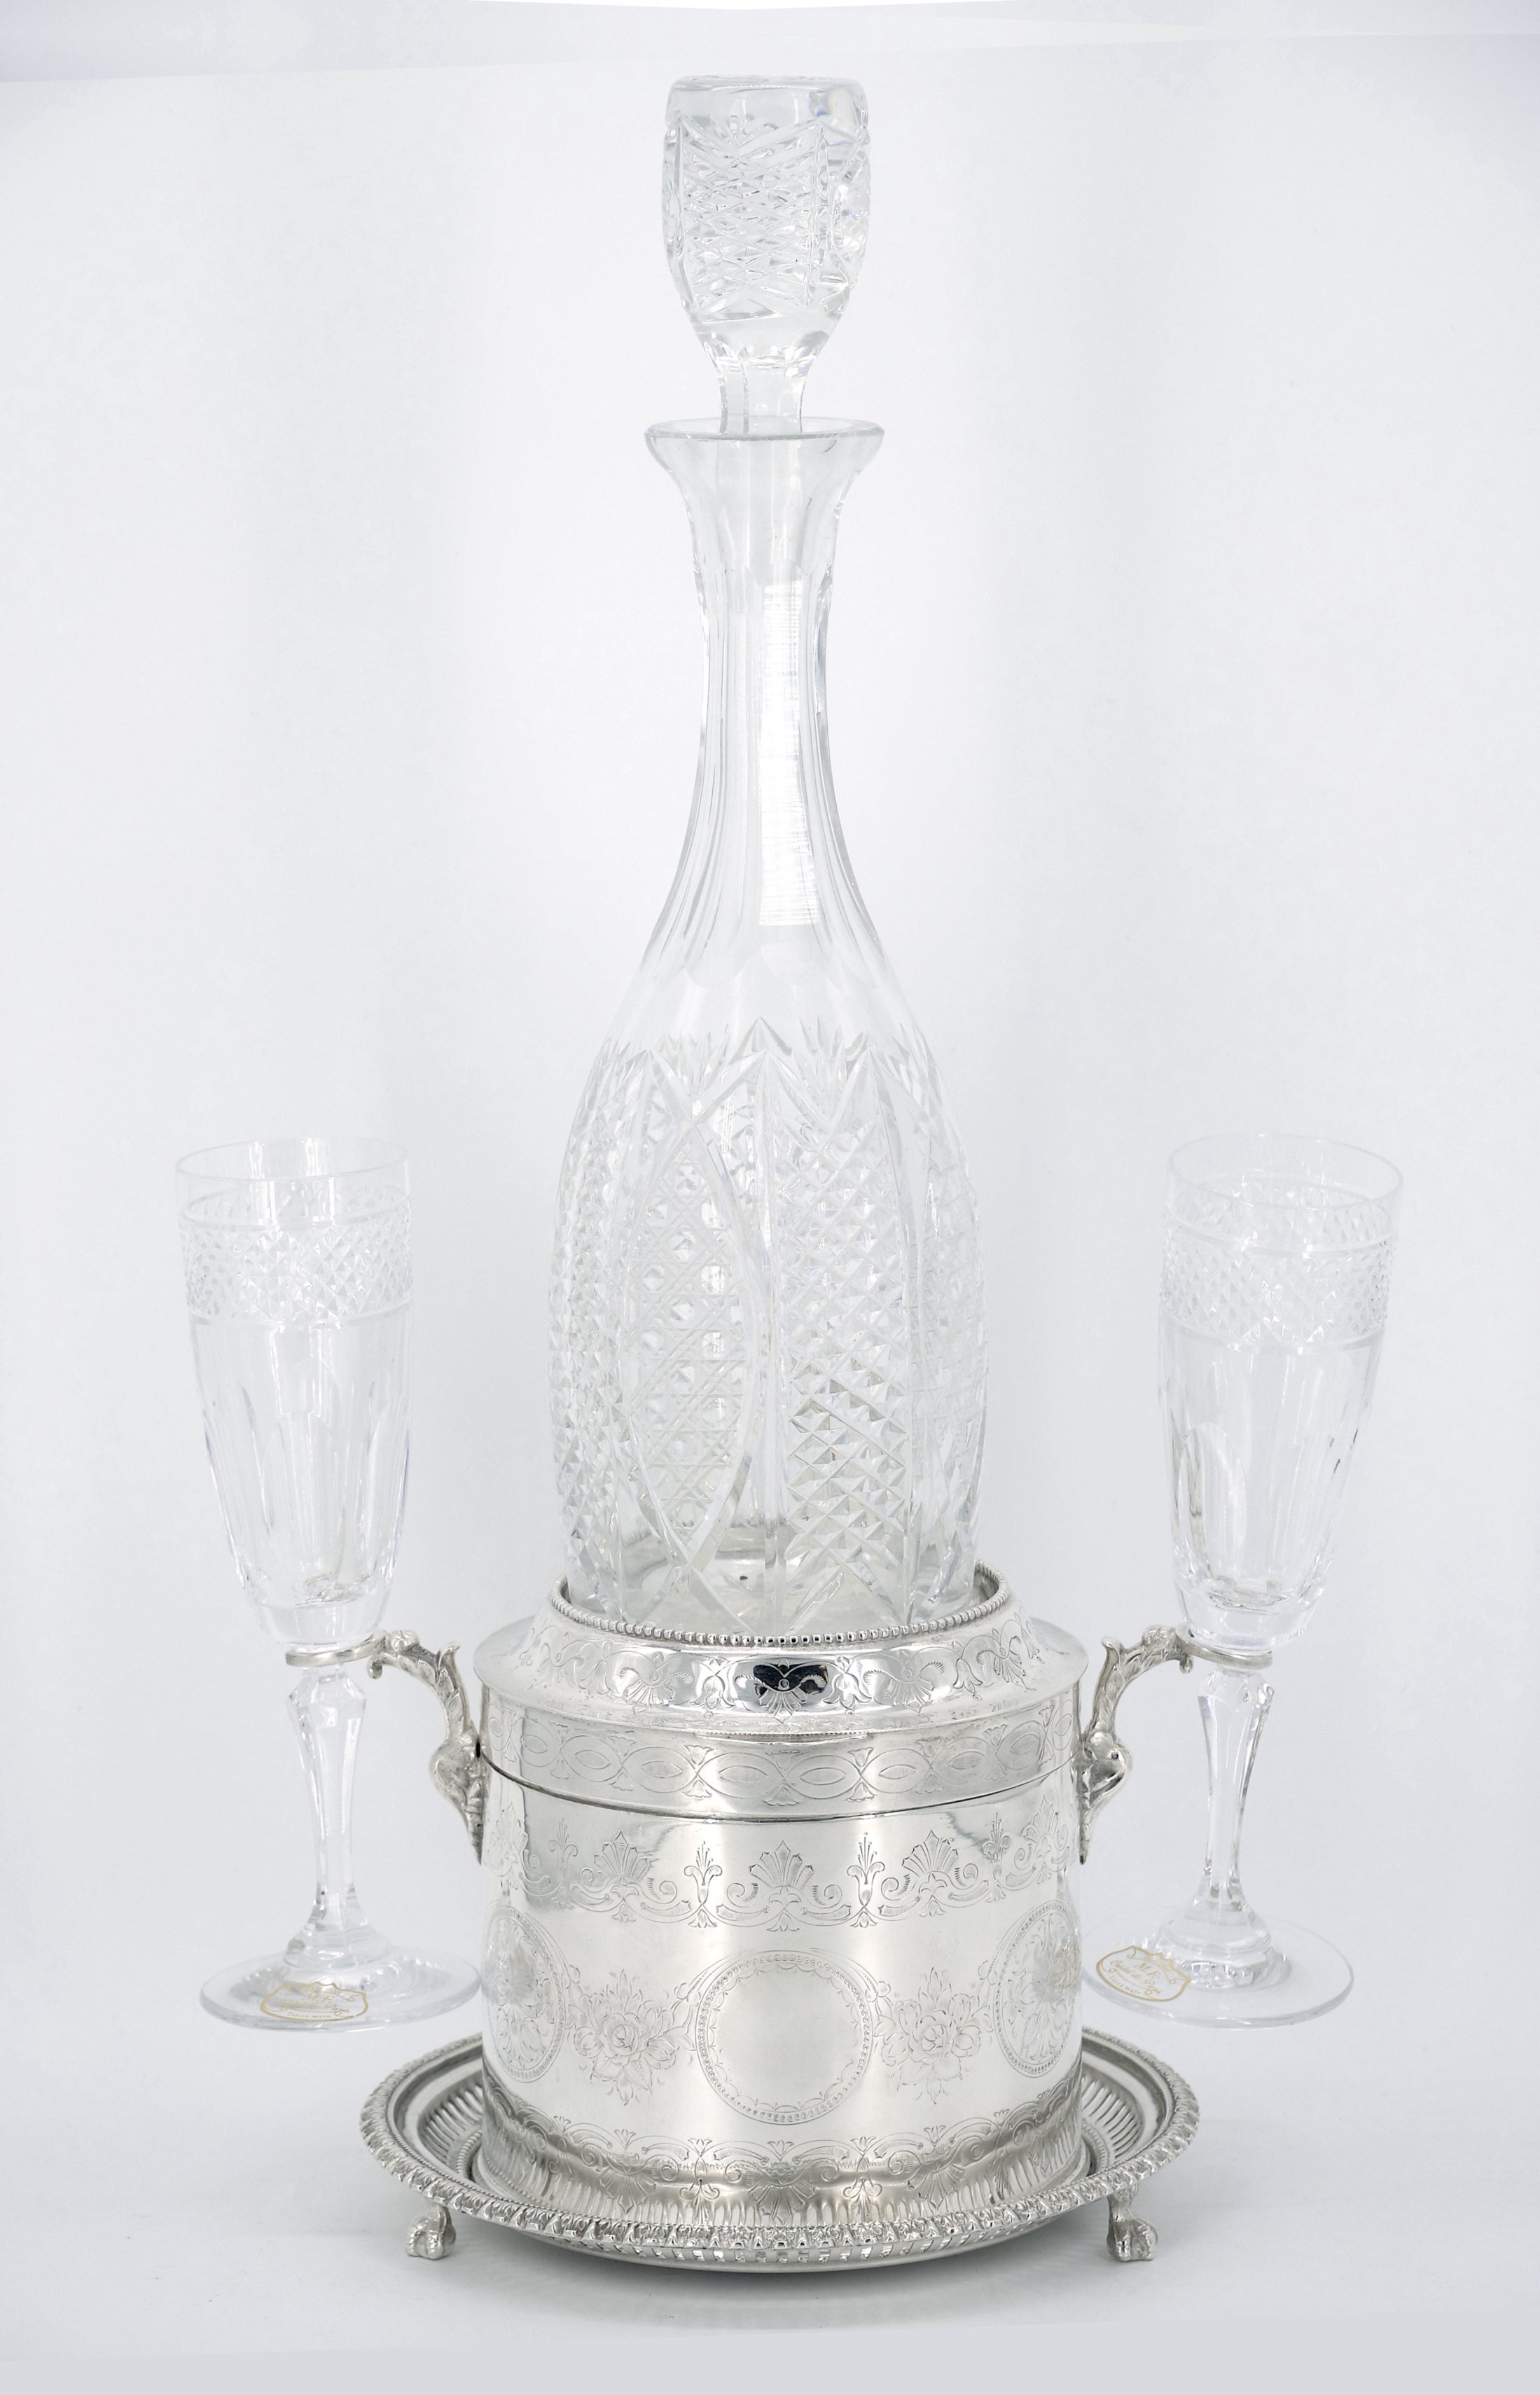 Step into the opulence of the 19th century with this exquisite 19th Century English Sheffield Silver Plate Ice Bucket, which doubles as a Tantalus. Meticulously crafted, this piece marries form and function in a remarkable display of craftsmanship.